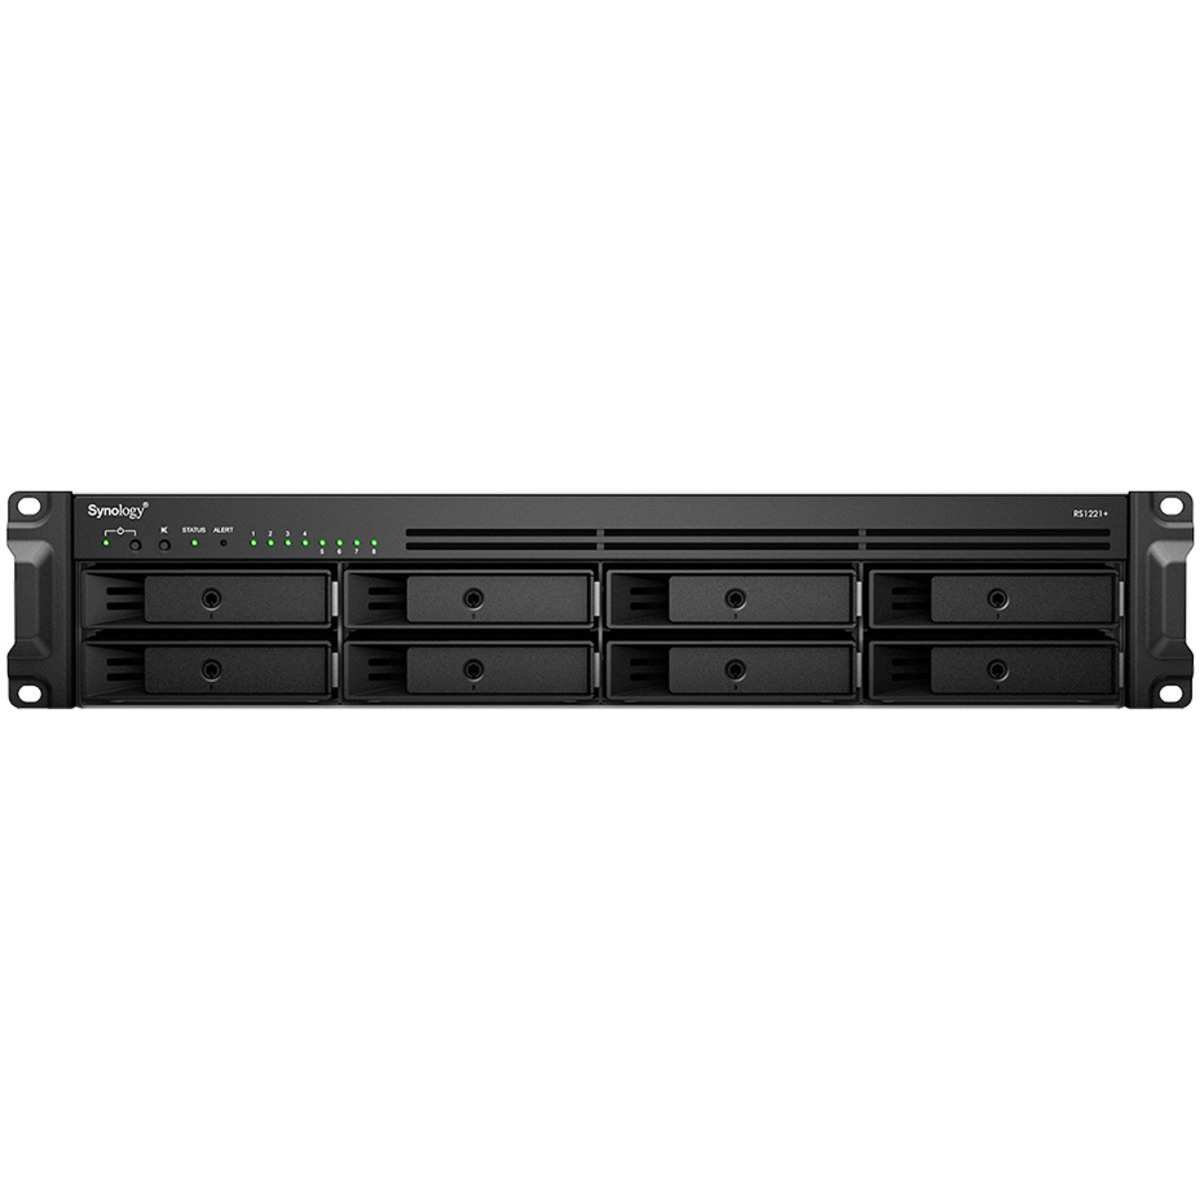 buy $3505 Synology RackStation RS1221+ 64tb RackMount NAS - Network Attached Storage Device 8x8000gb Toshiba Enterprise Capacity MG08ADA800E 3.5 7200rpm SATA 6Gb/s HDD ENTERPRISE Class Drives Installed - Burn-In Tested - ON SALE - nas headquarters buy network attached storage server device das new raid-5 free shipping usa christmas new year holiday sale RackStation RS1221+